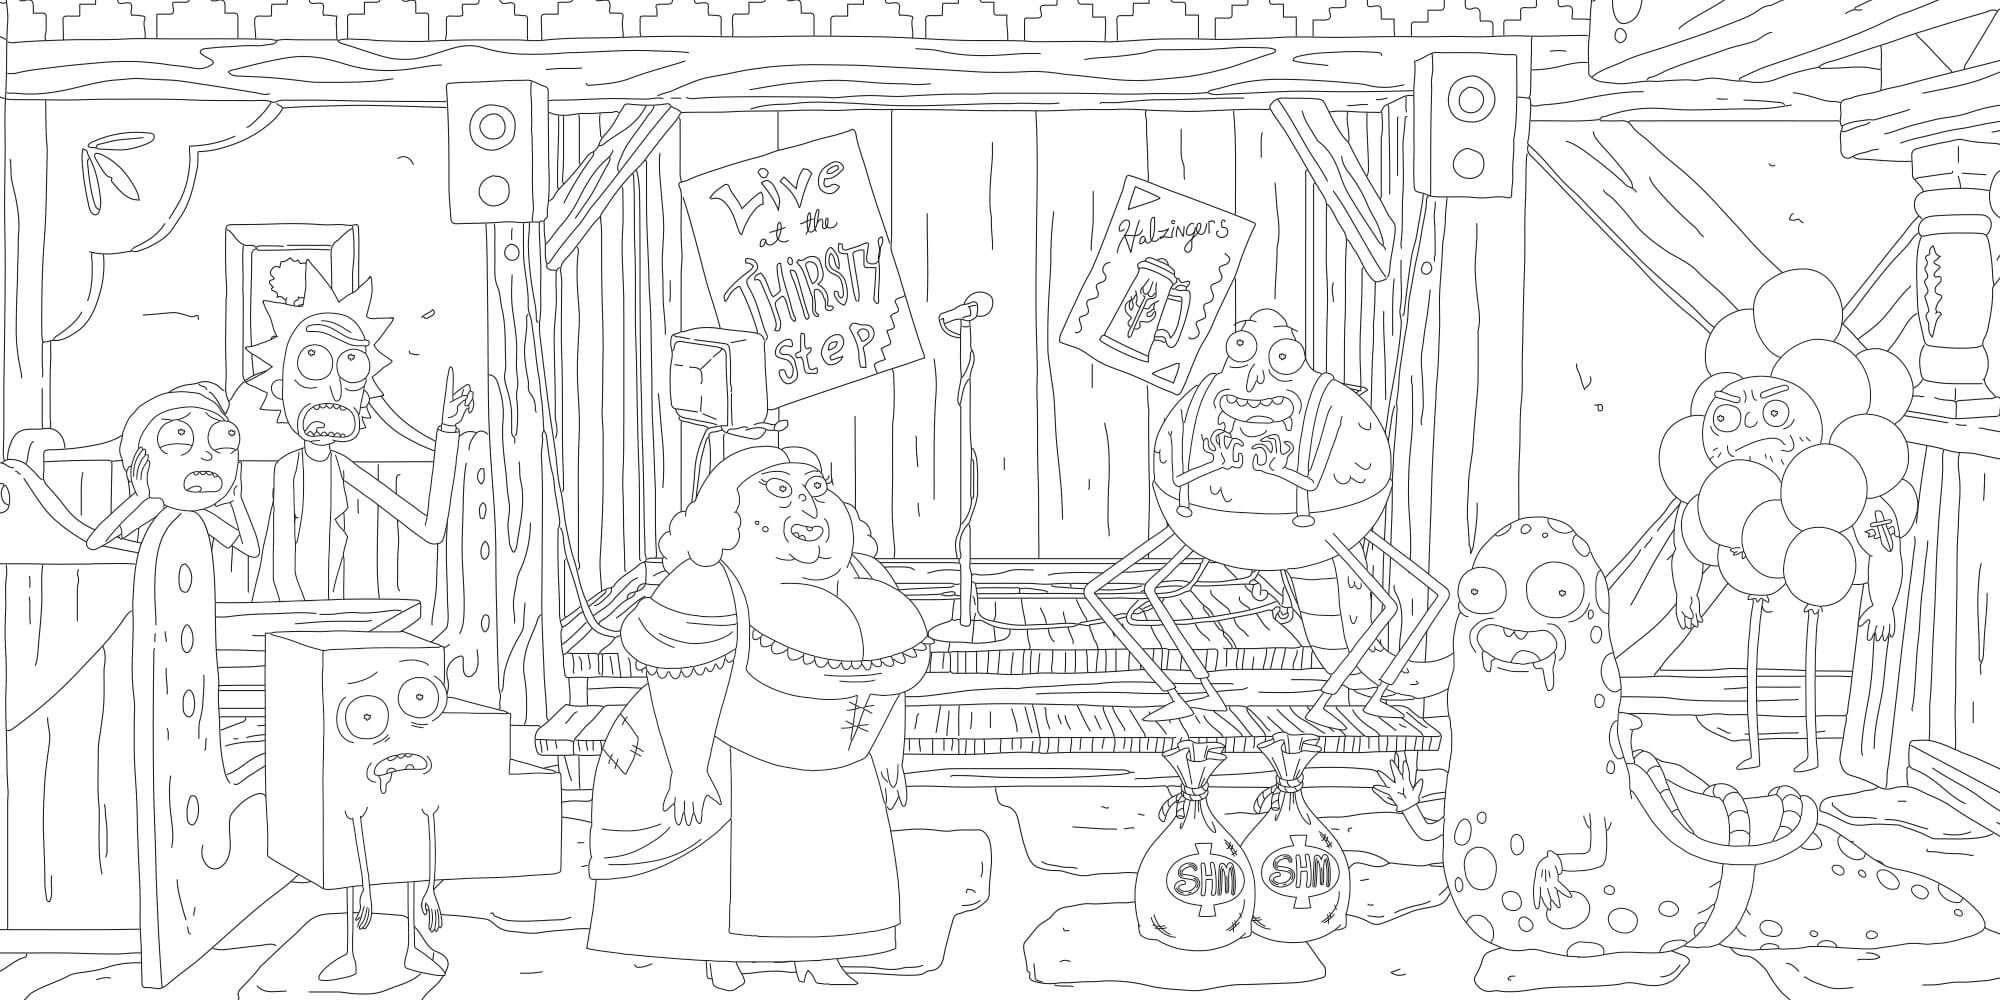 South Park Coloring Page Coloring Rick Andrty Coloring Pages Lezincnyc Free Printable South